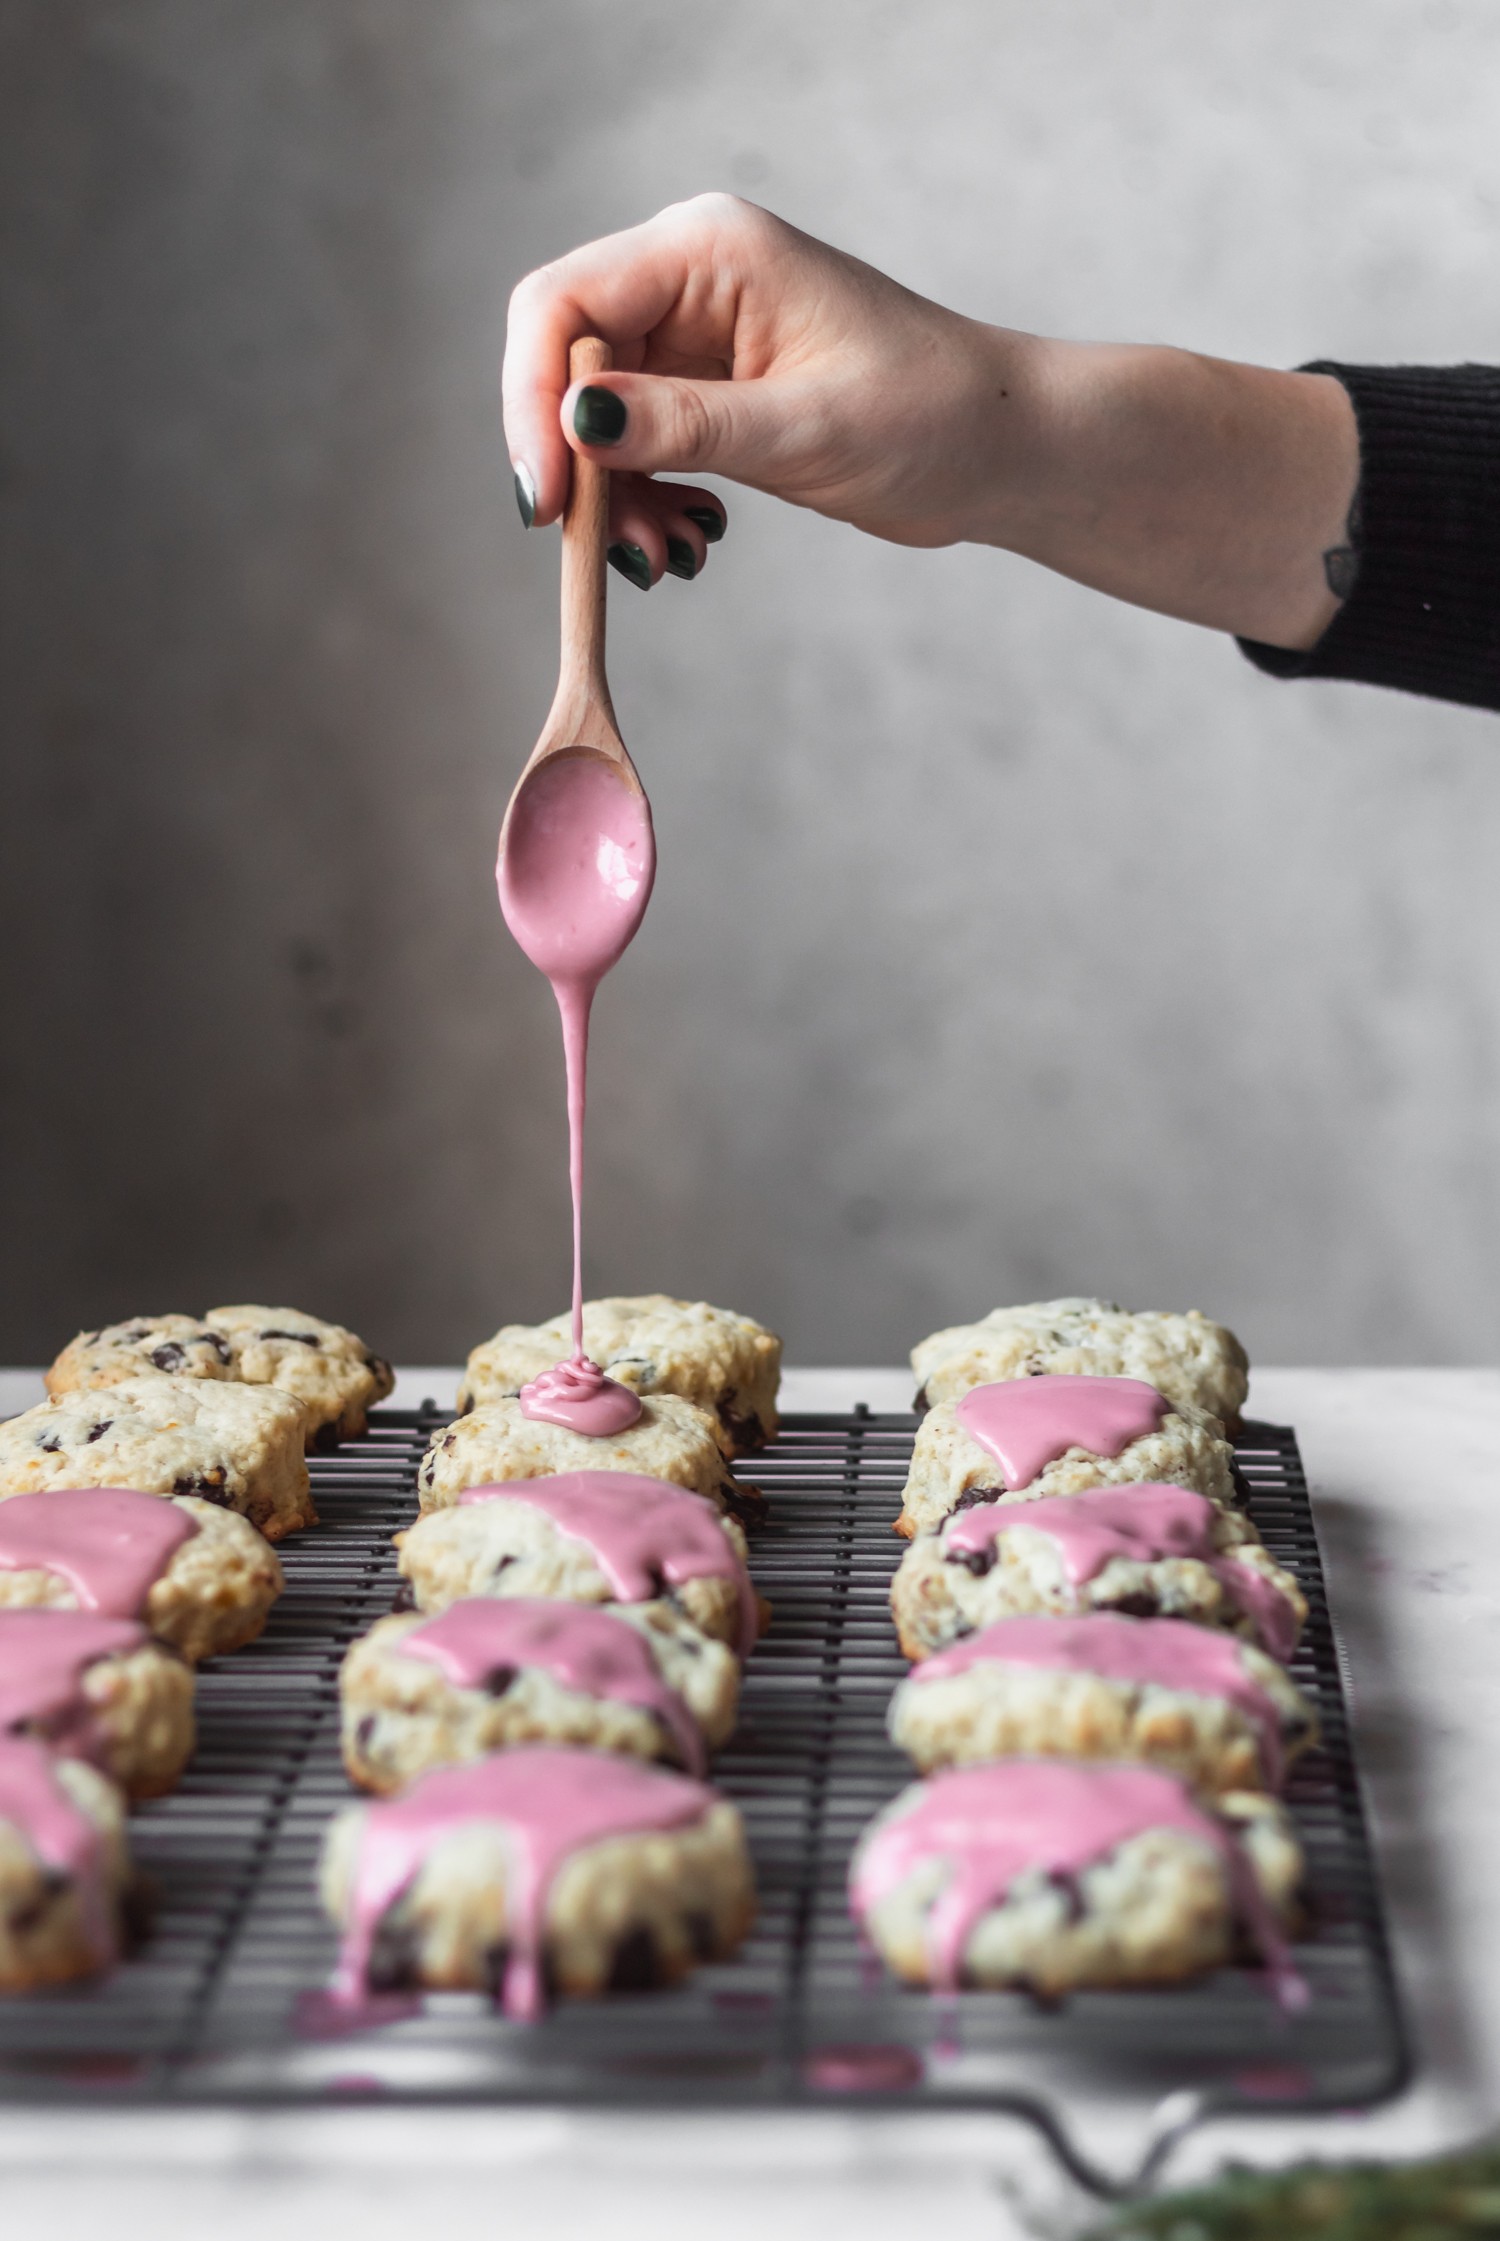 Chocolate biscuits lined on a wire rack while a woman's hand drizzles pink glaze on top.